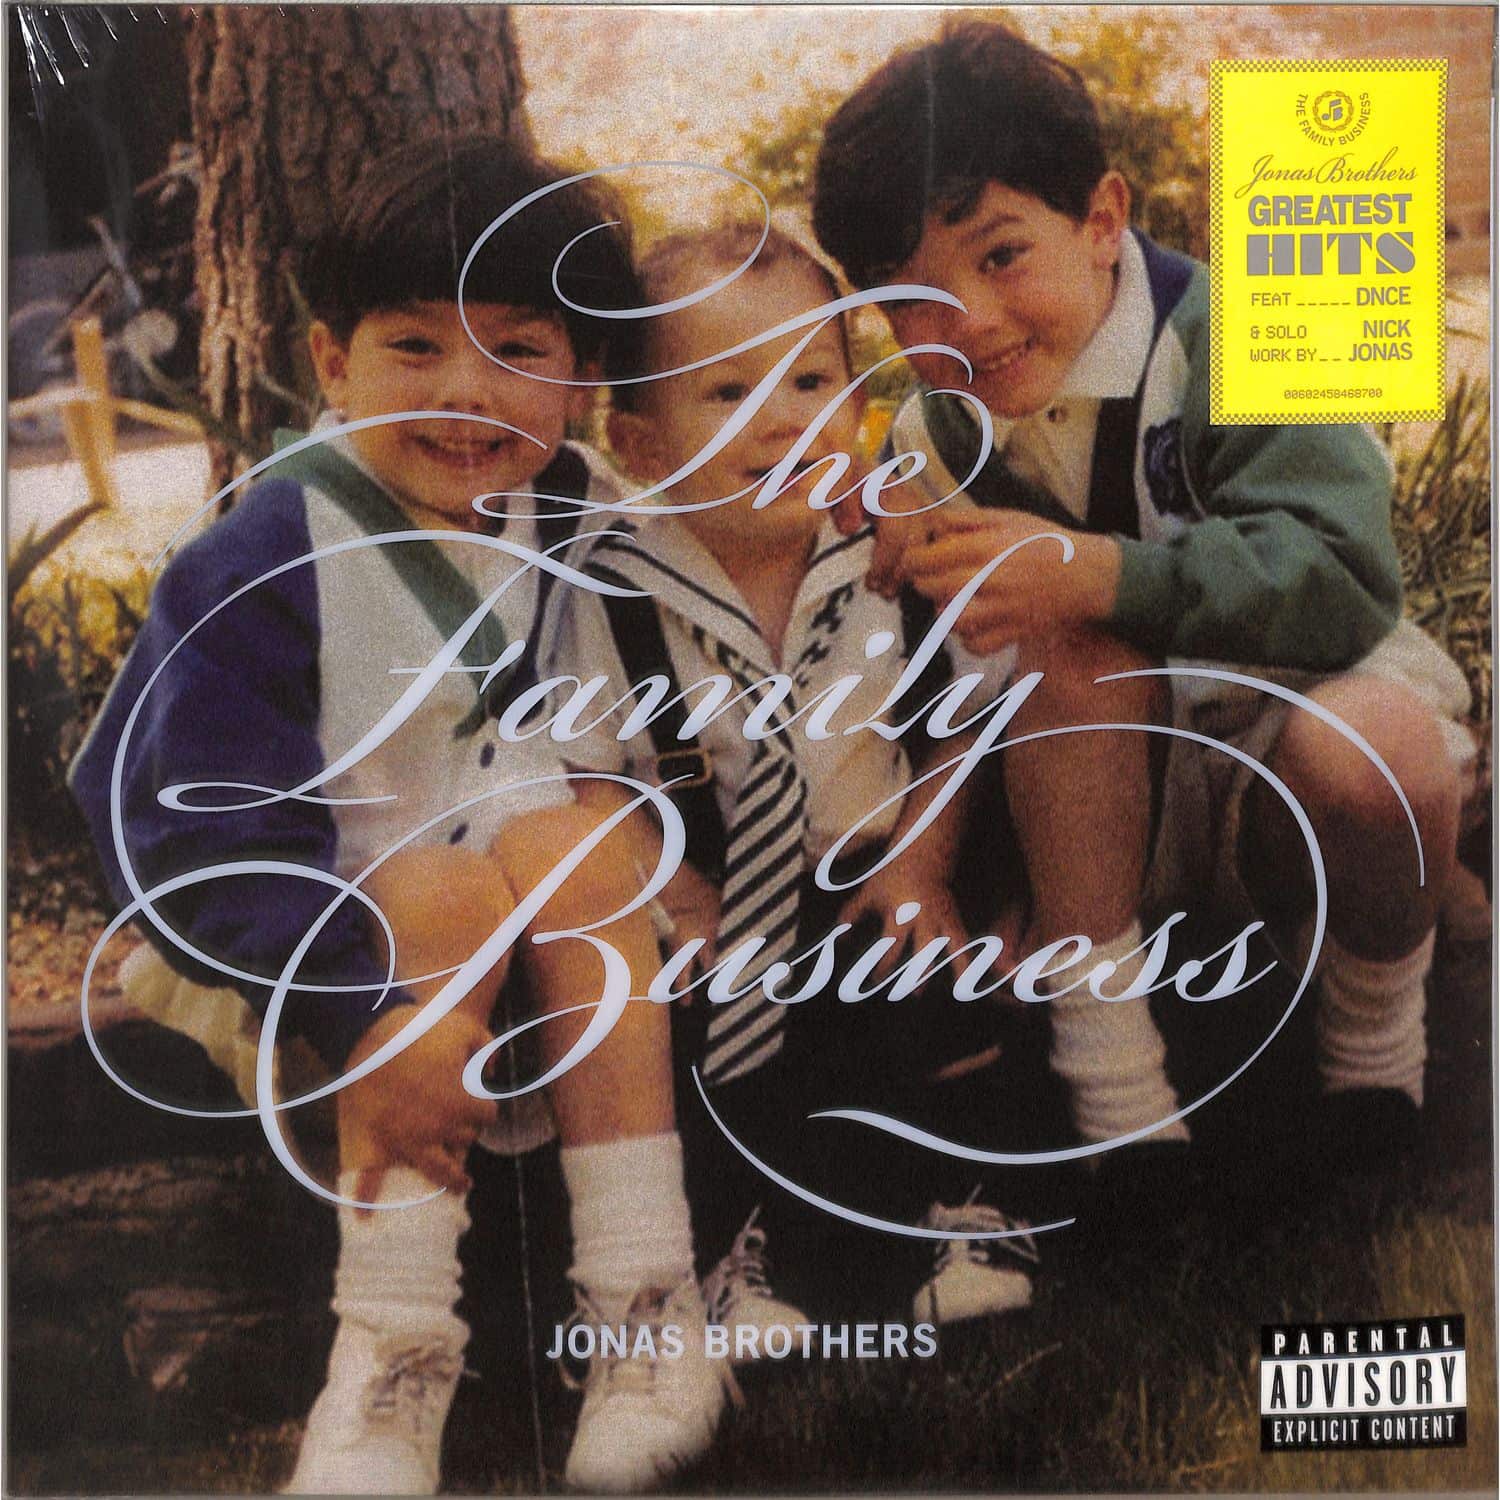 Jonas Brothers - THE FAMILY BUSINESS 